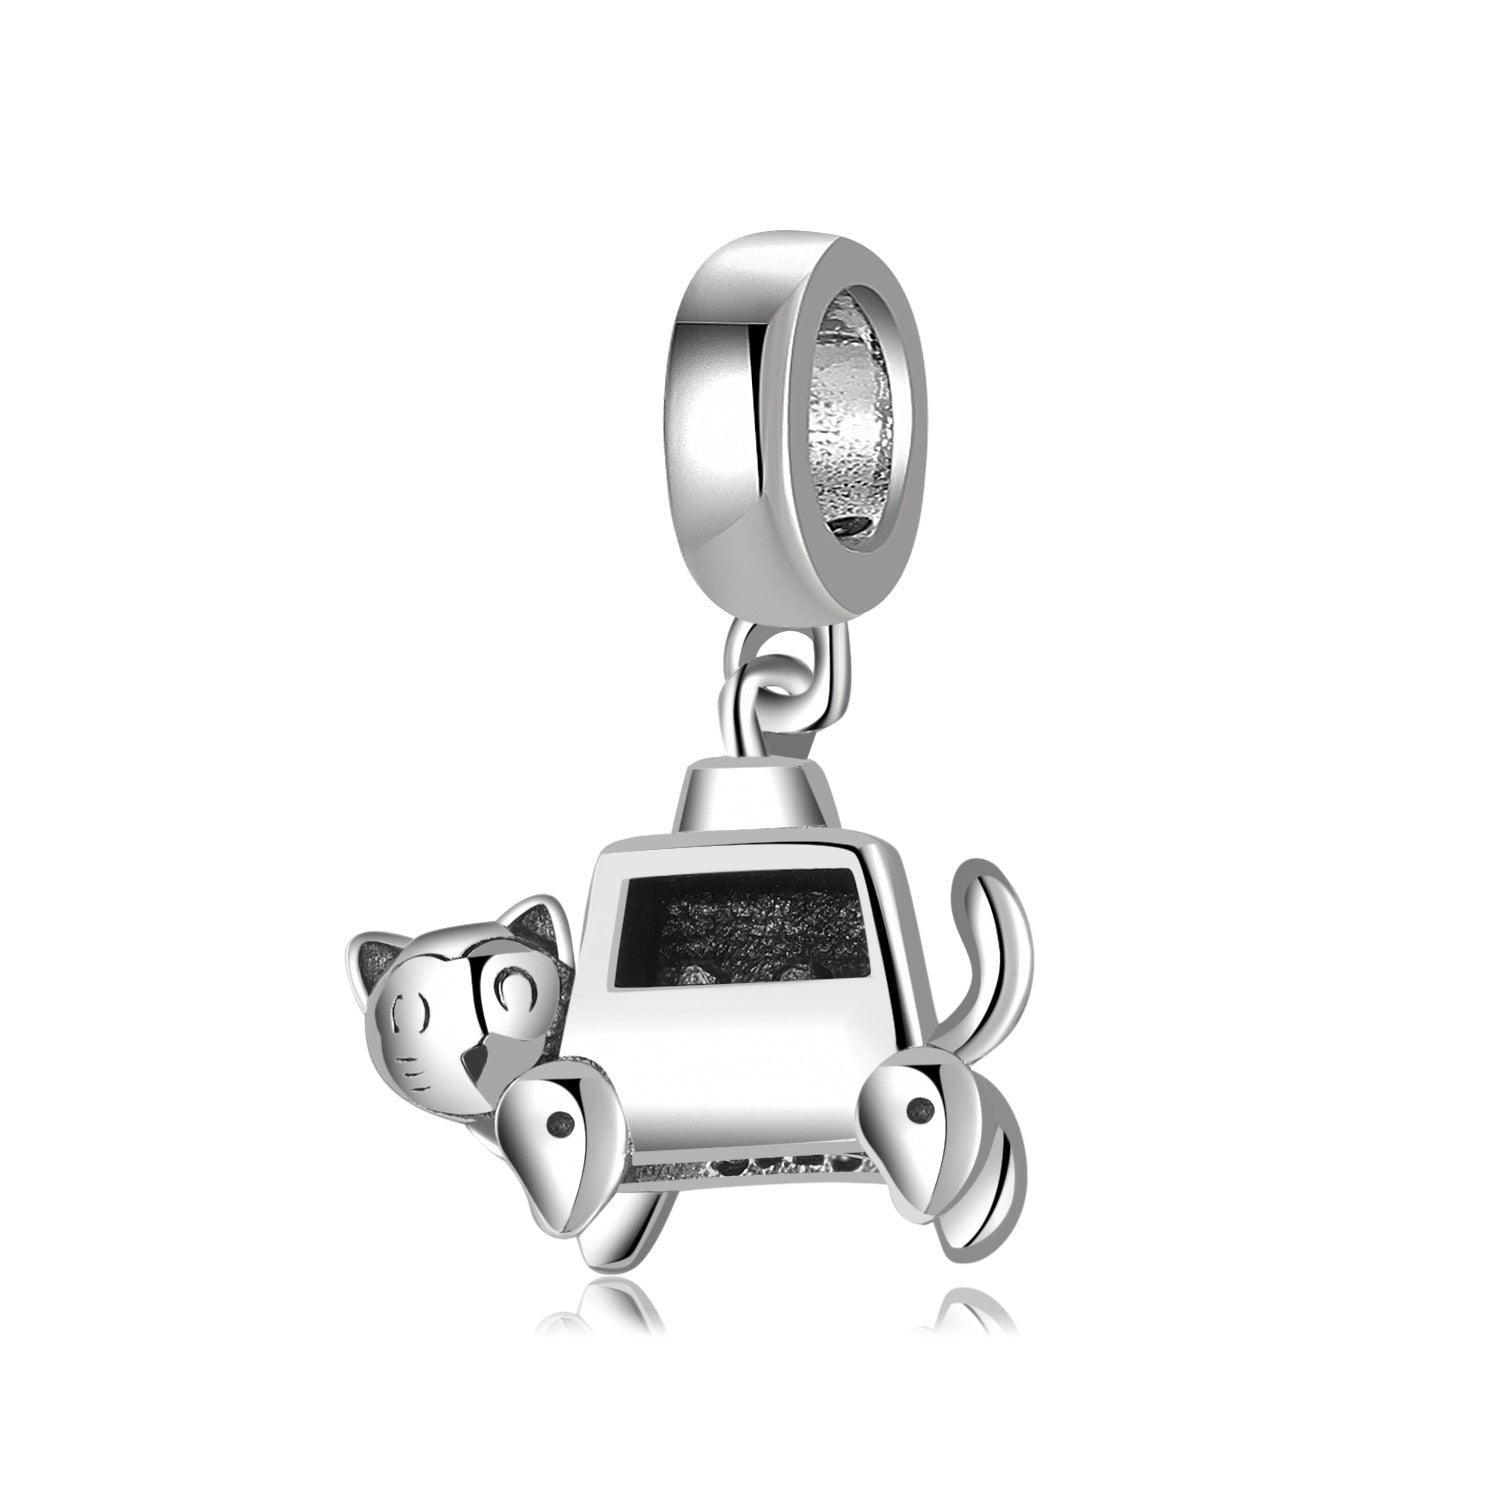 Pig Oven All Kinds Of Cross-border Charm Bracelet Beads for Christmas 2023 | Pig Oven All Kinds Of Cross-border Charm Bracelet Beads - undefined | Charm Bracelet Beads for Bracelets, Cute Charm, Pig Oven Charm Beads Accessories, S925 Sterling Silver Charm Beads | From Hunny Life | hunnylife.com